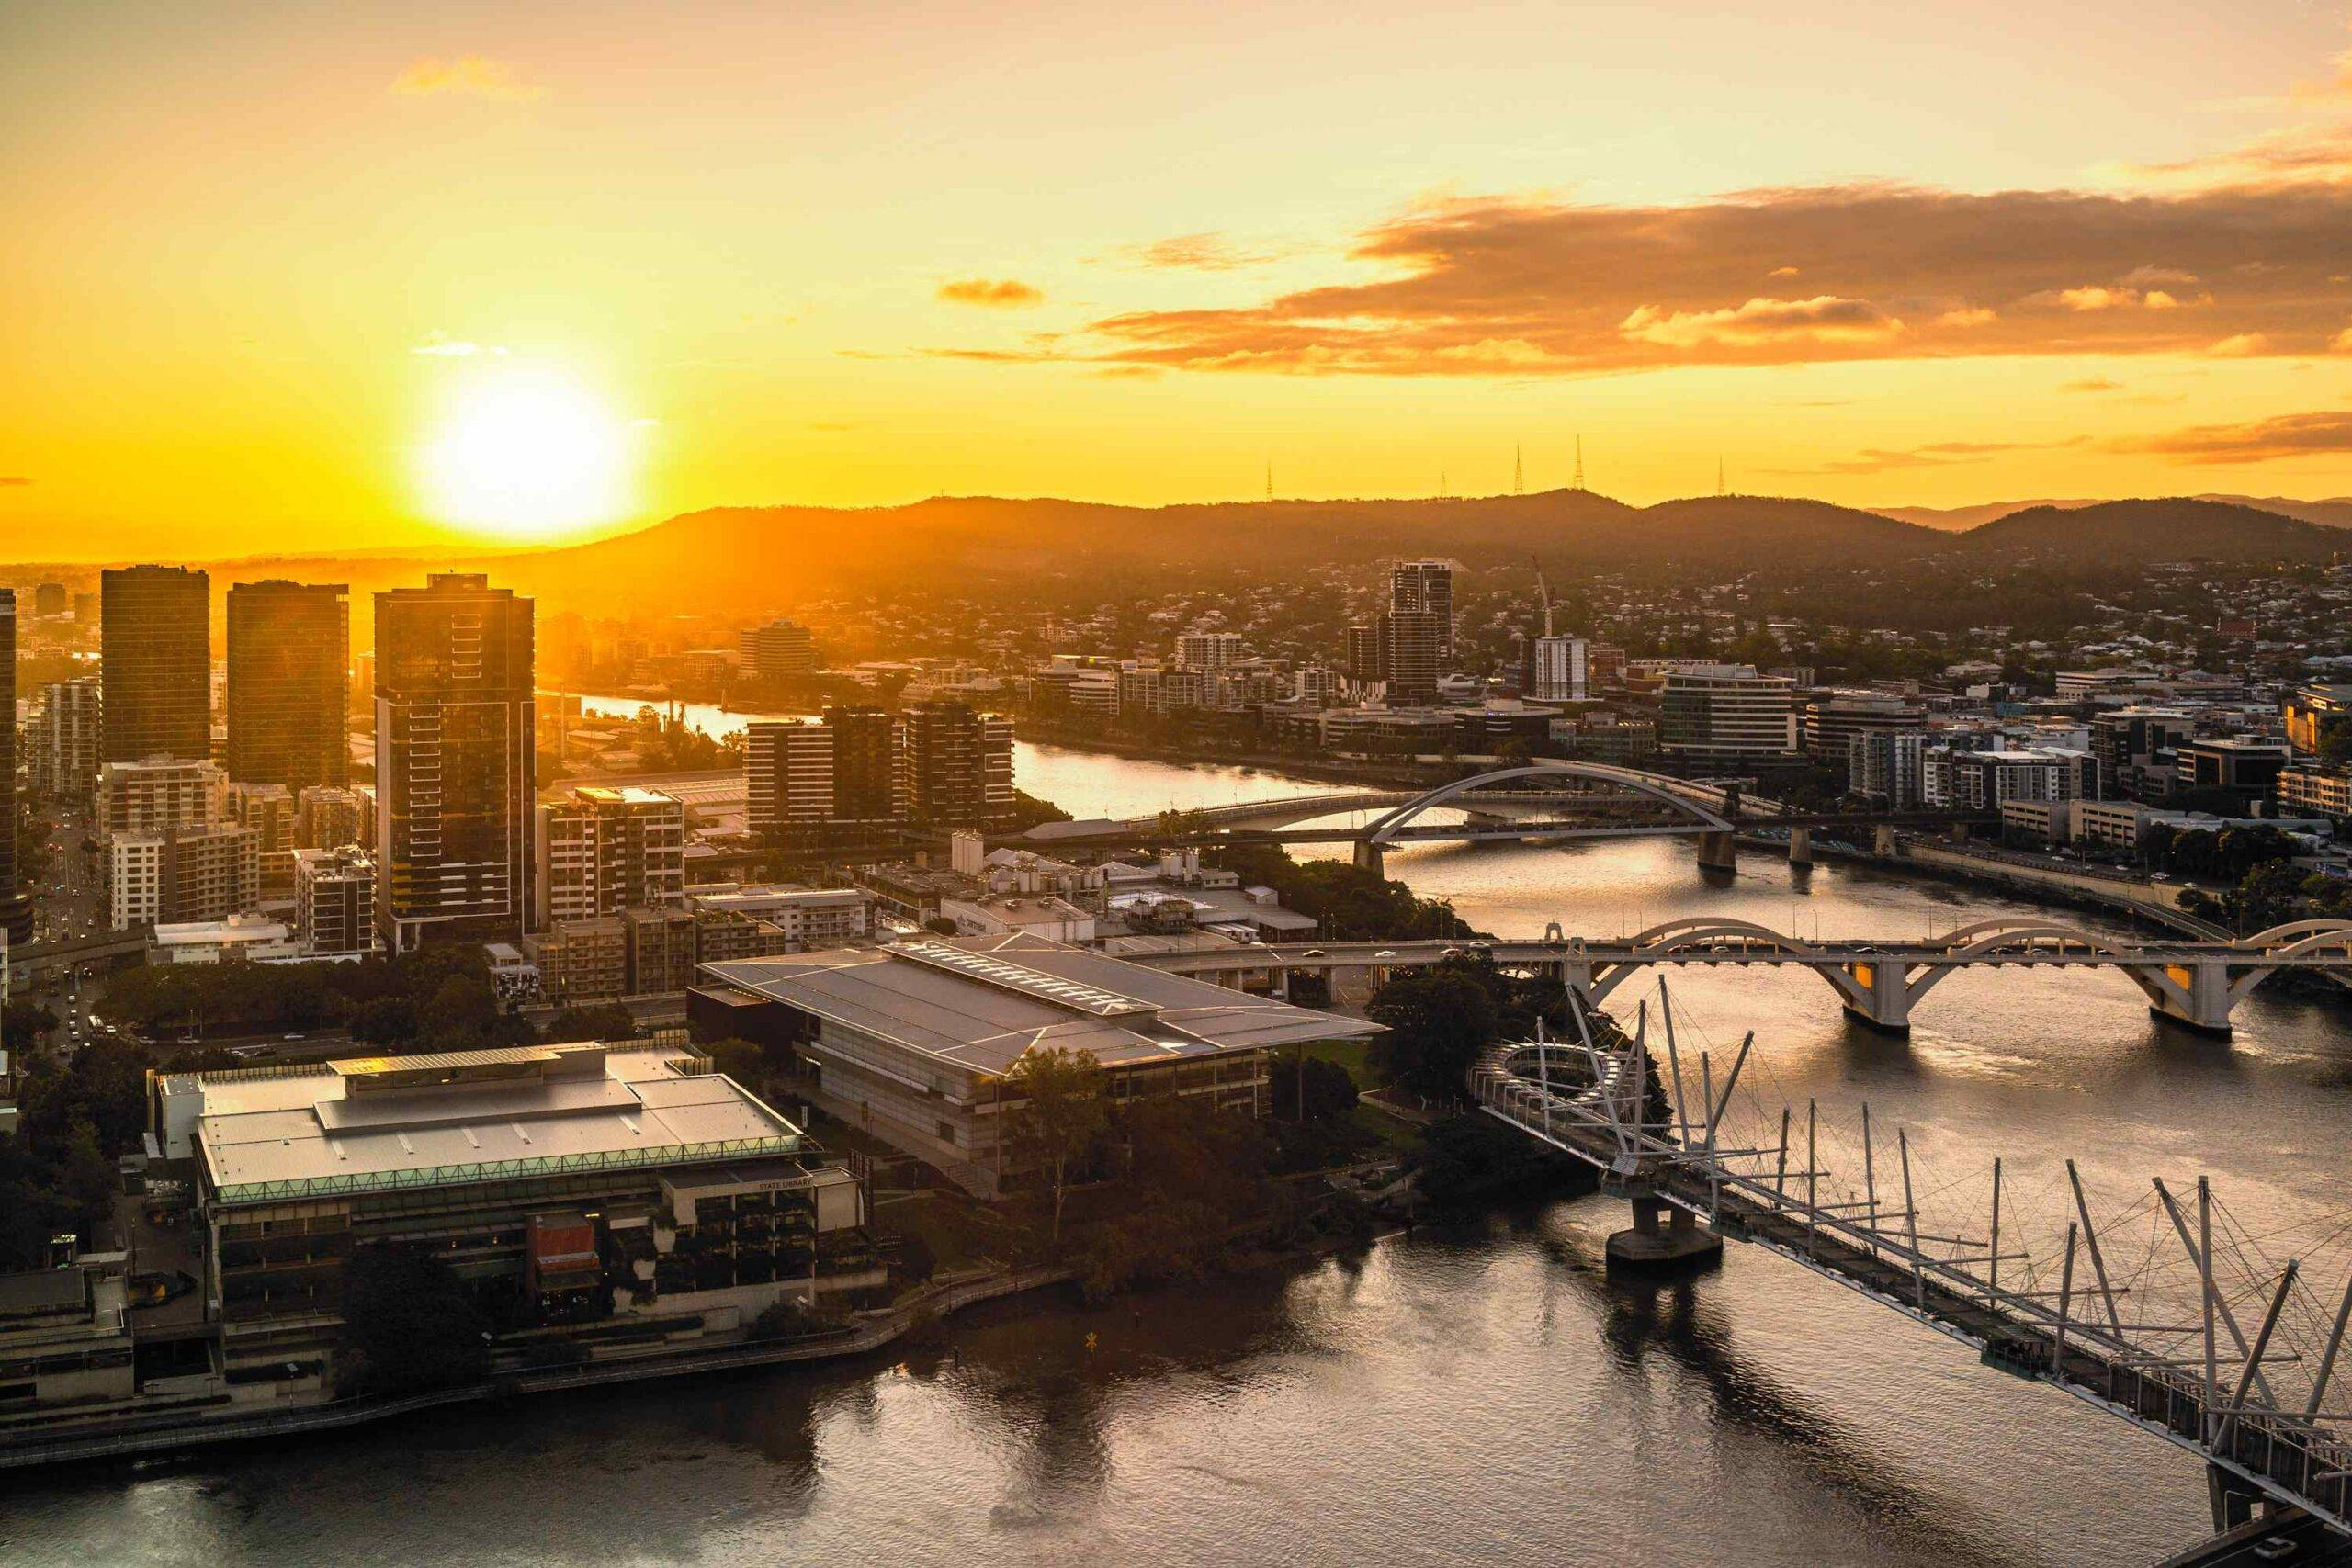 golden hour in brisbane is pretty special sunset 2022 11 08 10 52 58 utc 1 scaled - Decon Solutions Australia Services